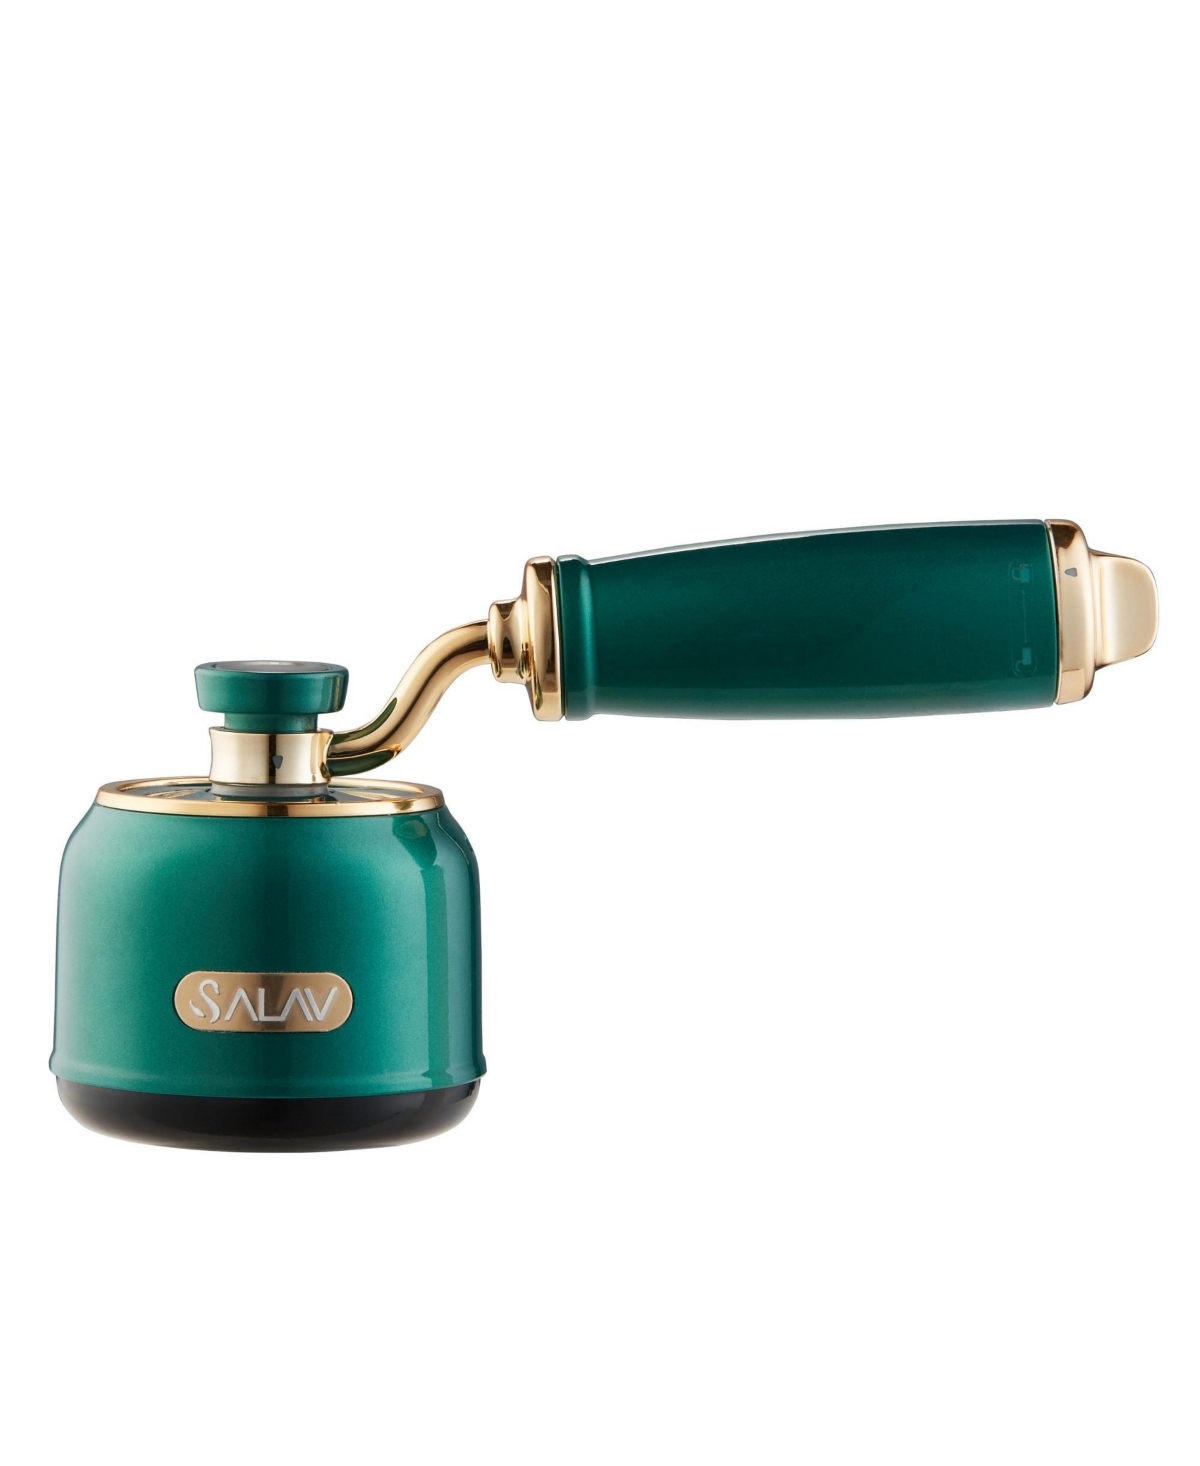 Salav Lr-900 Retro Edition Fabric Shaver And Lint Roller In Emerald